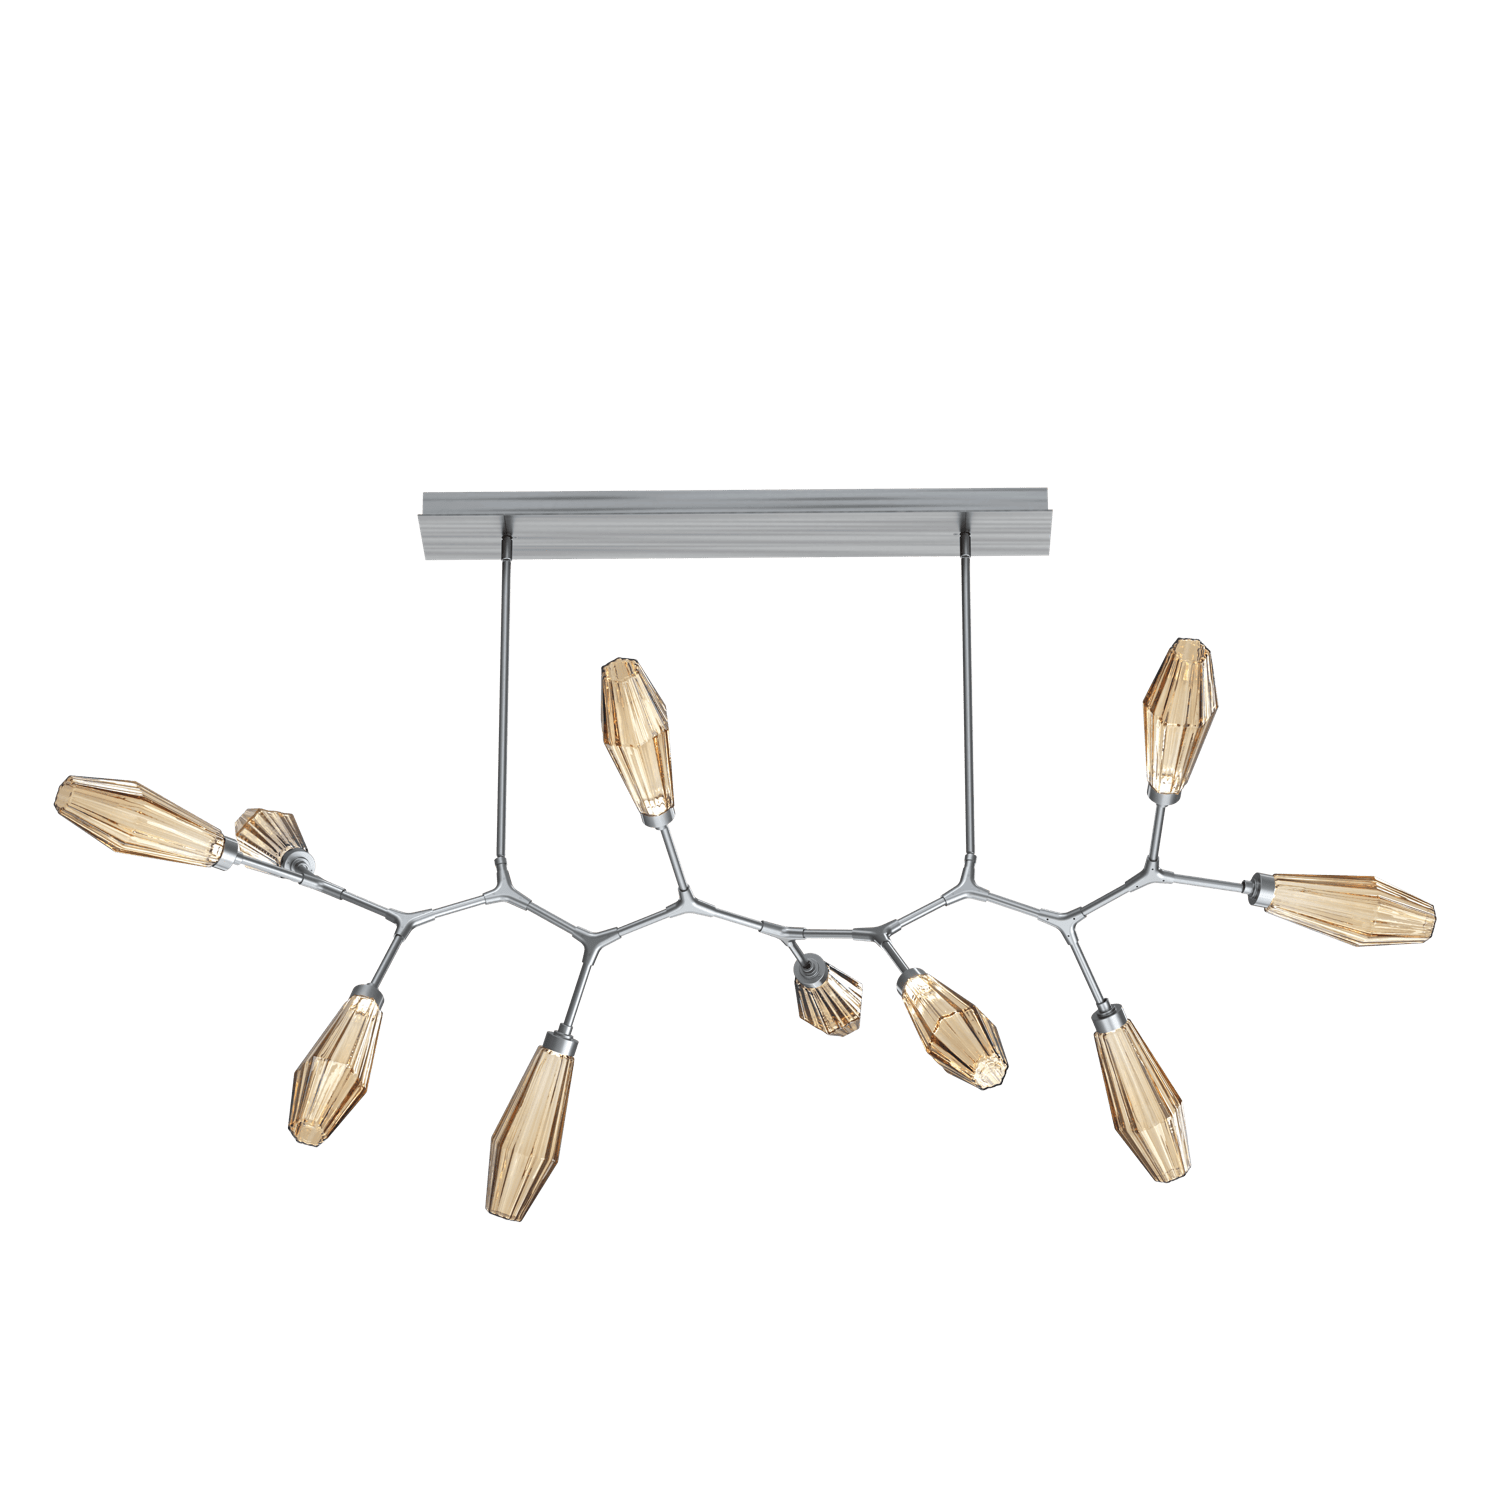 PLB0049-BC-GM-RB-Hammerton-Studio-Aalto-10-light-modern-branch-chandelier-with-gunmetal-finish-and-optic-ribbed-bronze-glass-shades-and-LED-lamping